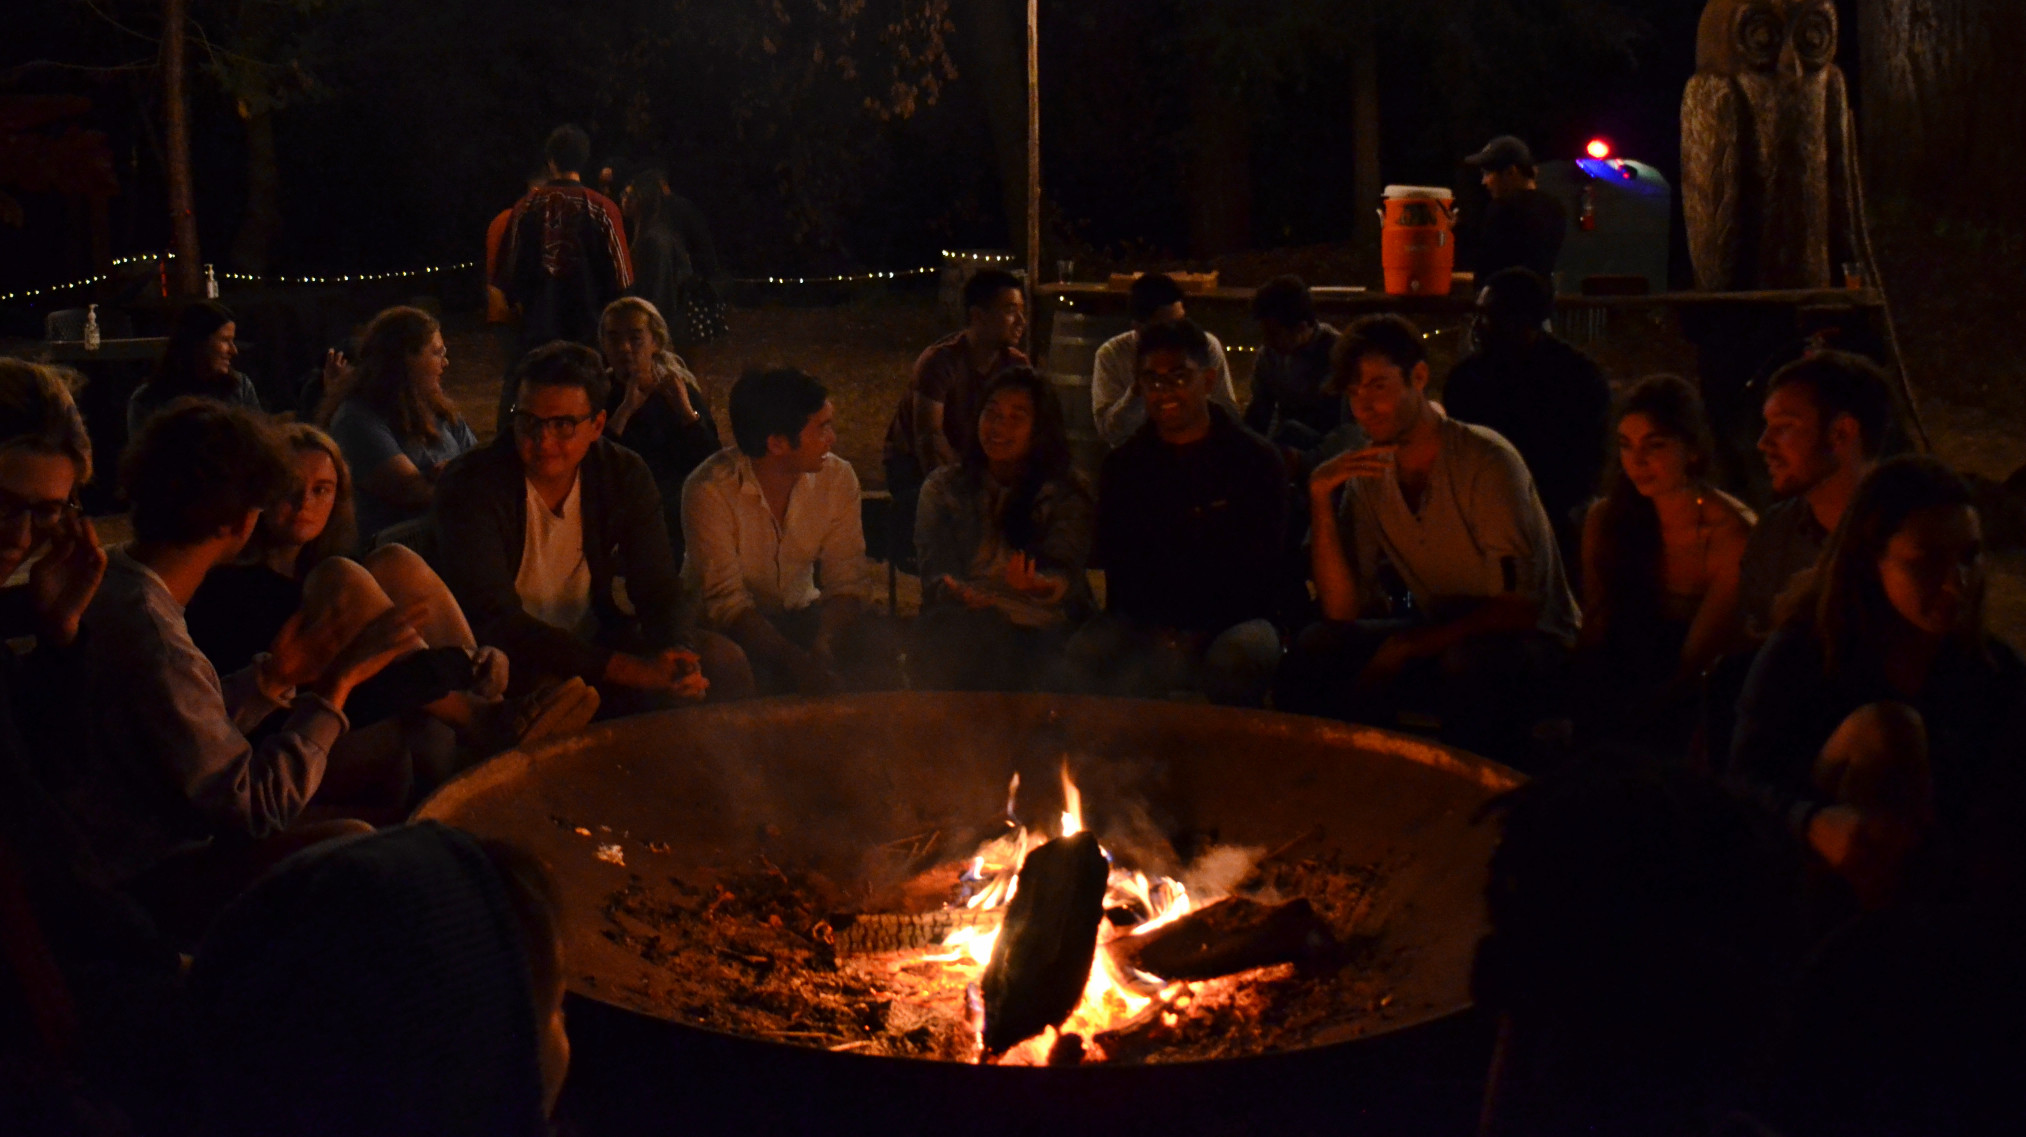 A fireplace discussion at an Interact Retreat